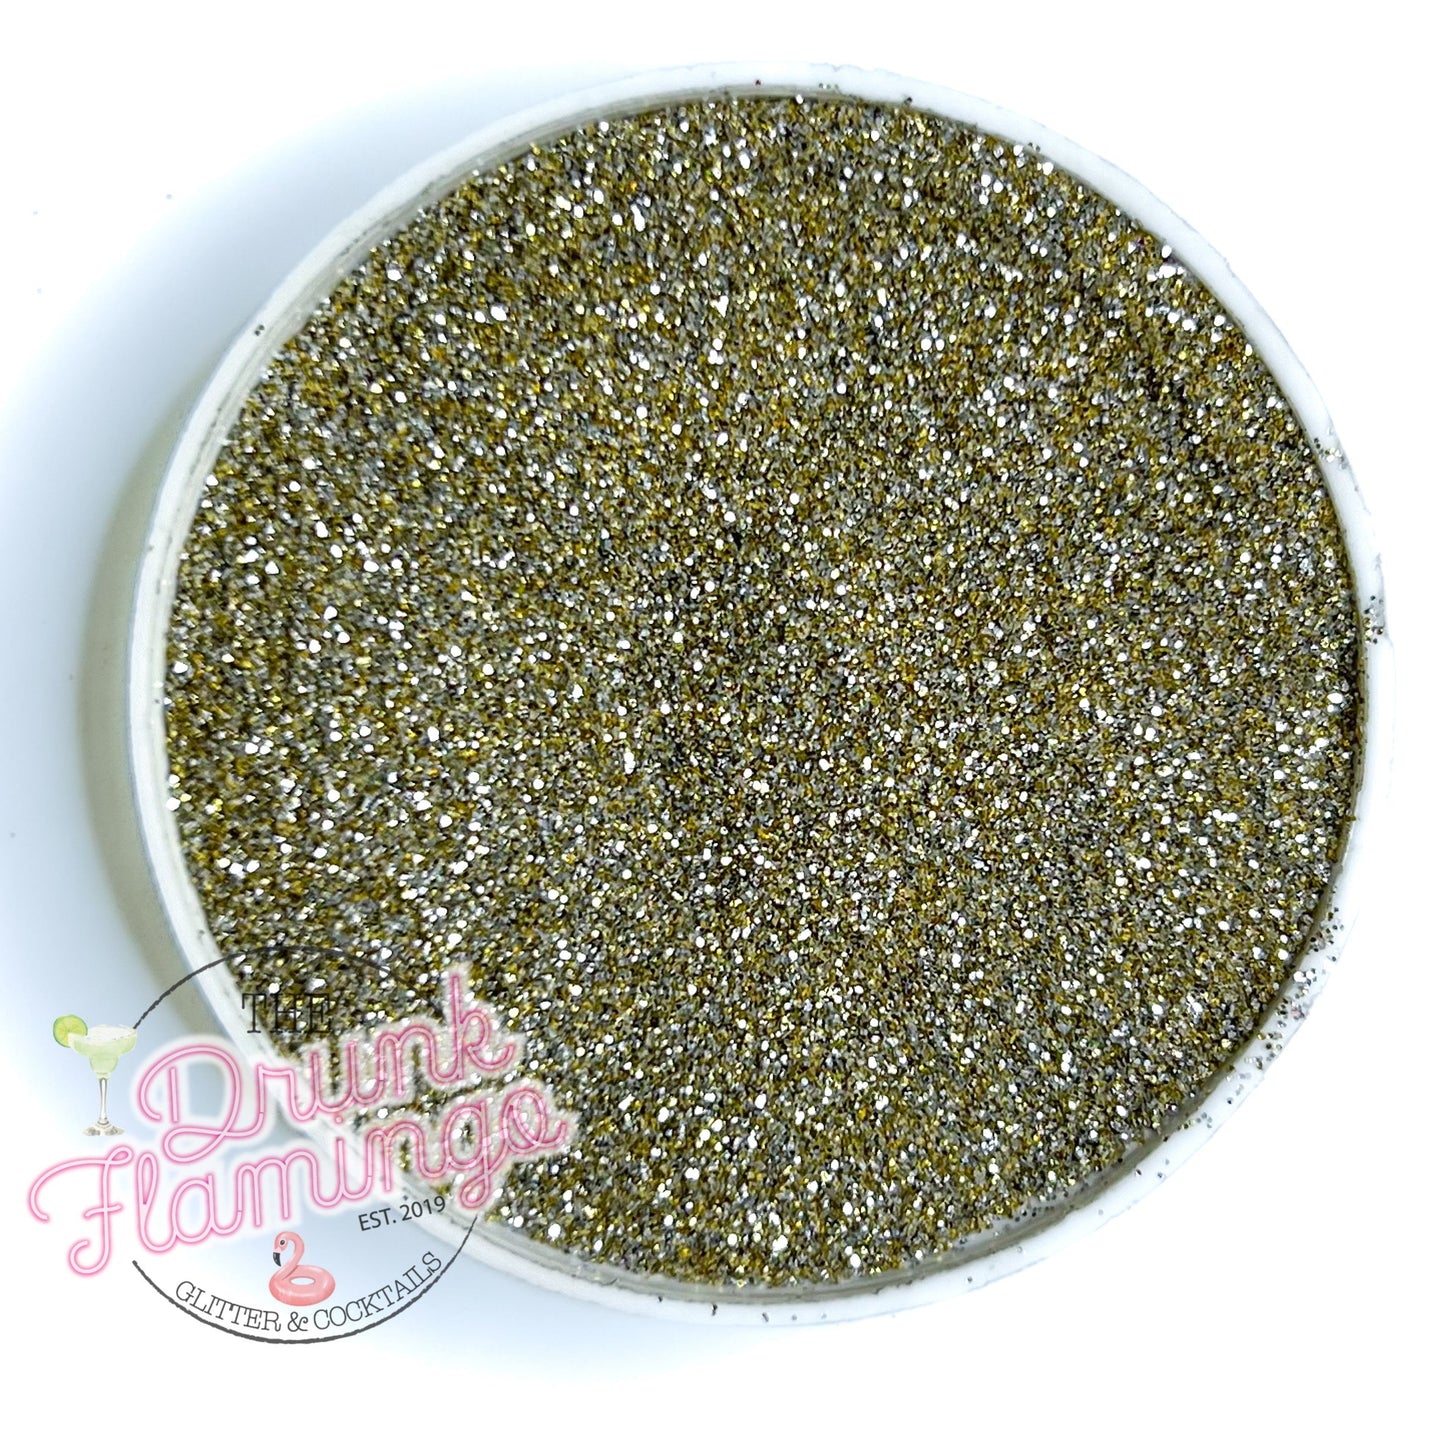 Sleigh All Day - Silver and Champagne Gold Fine Glitter Mix